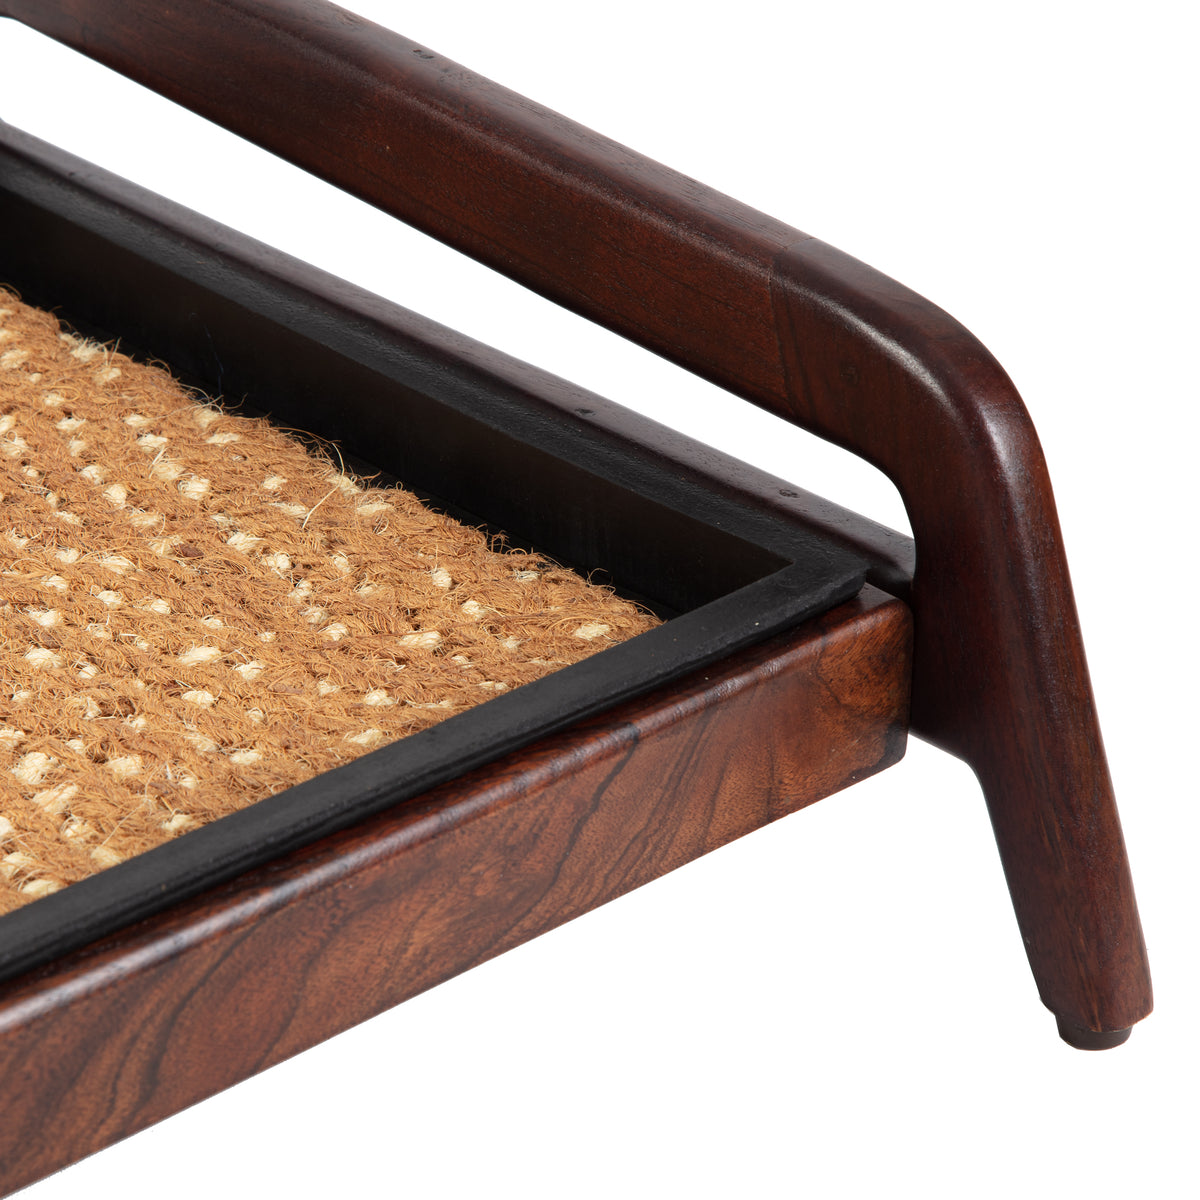 Anji Mountain Wooden Boot/Shoe Tray Stand with Coir Insert, 2 Tier, Fits 4  Pair (26.5 L x 22 W x15 H), Natural